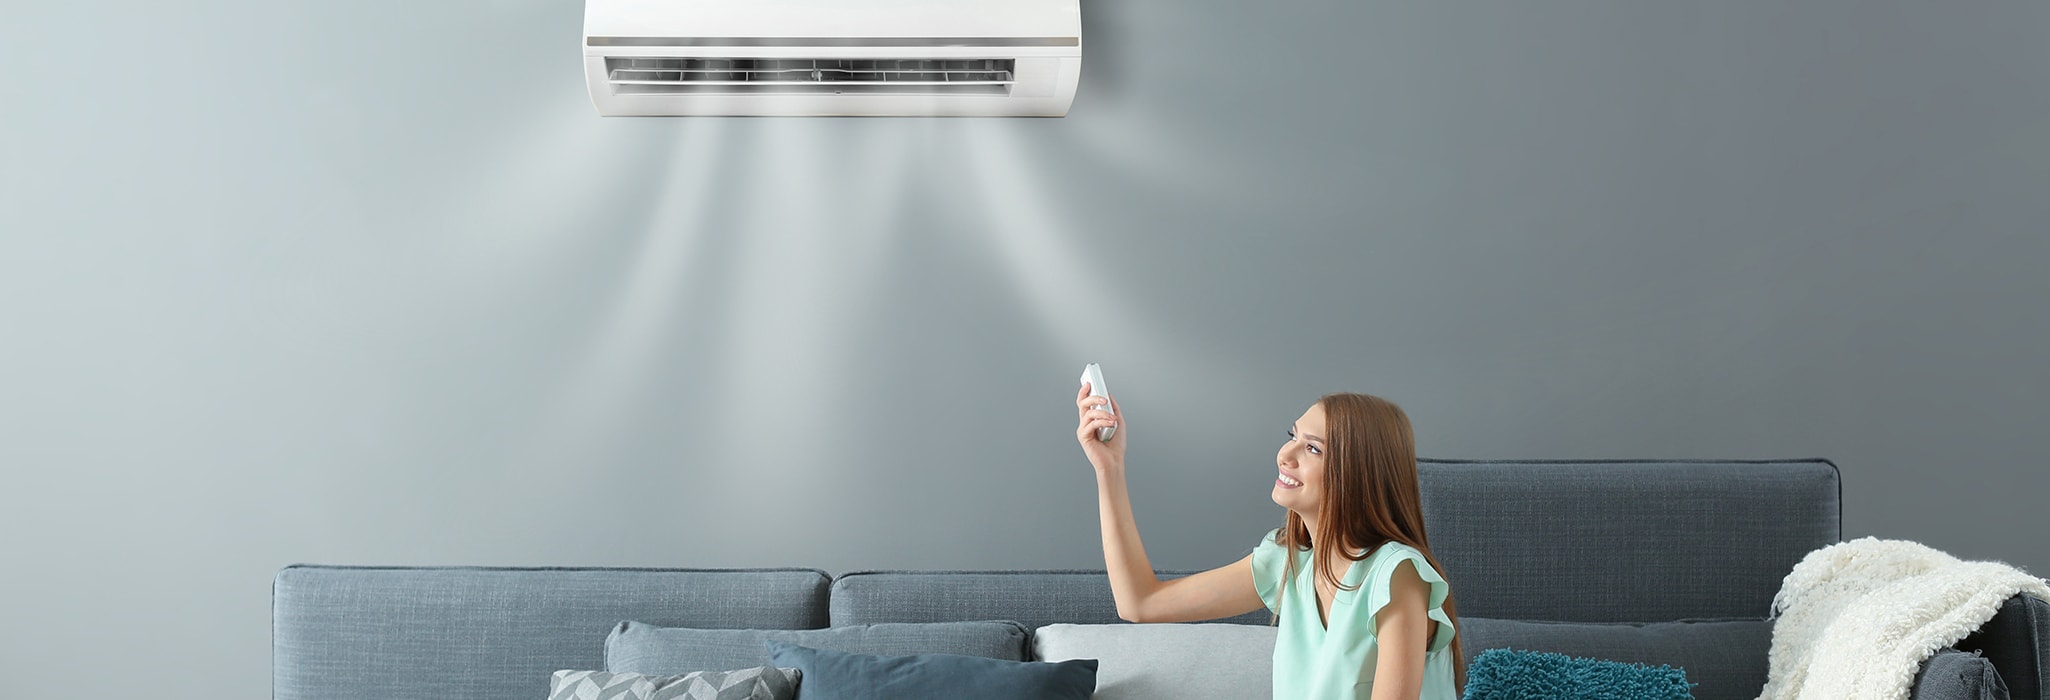 ductless_2050x700.jpg